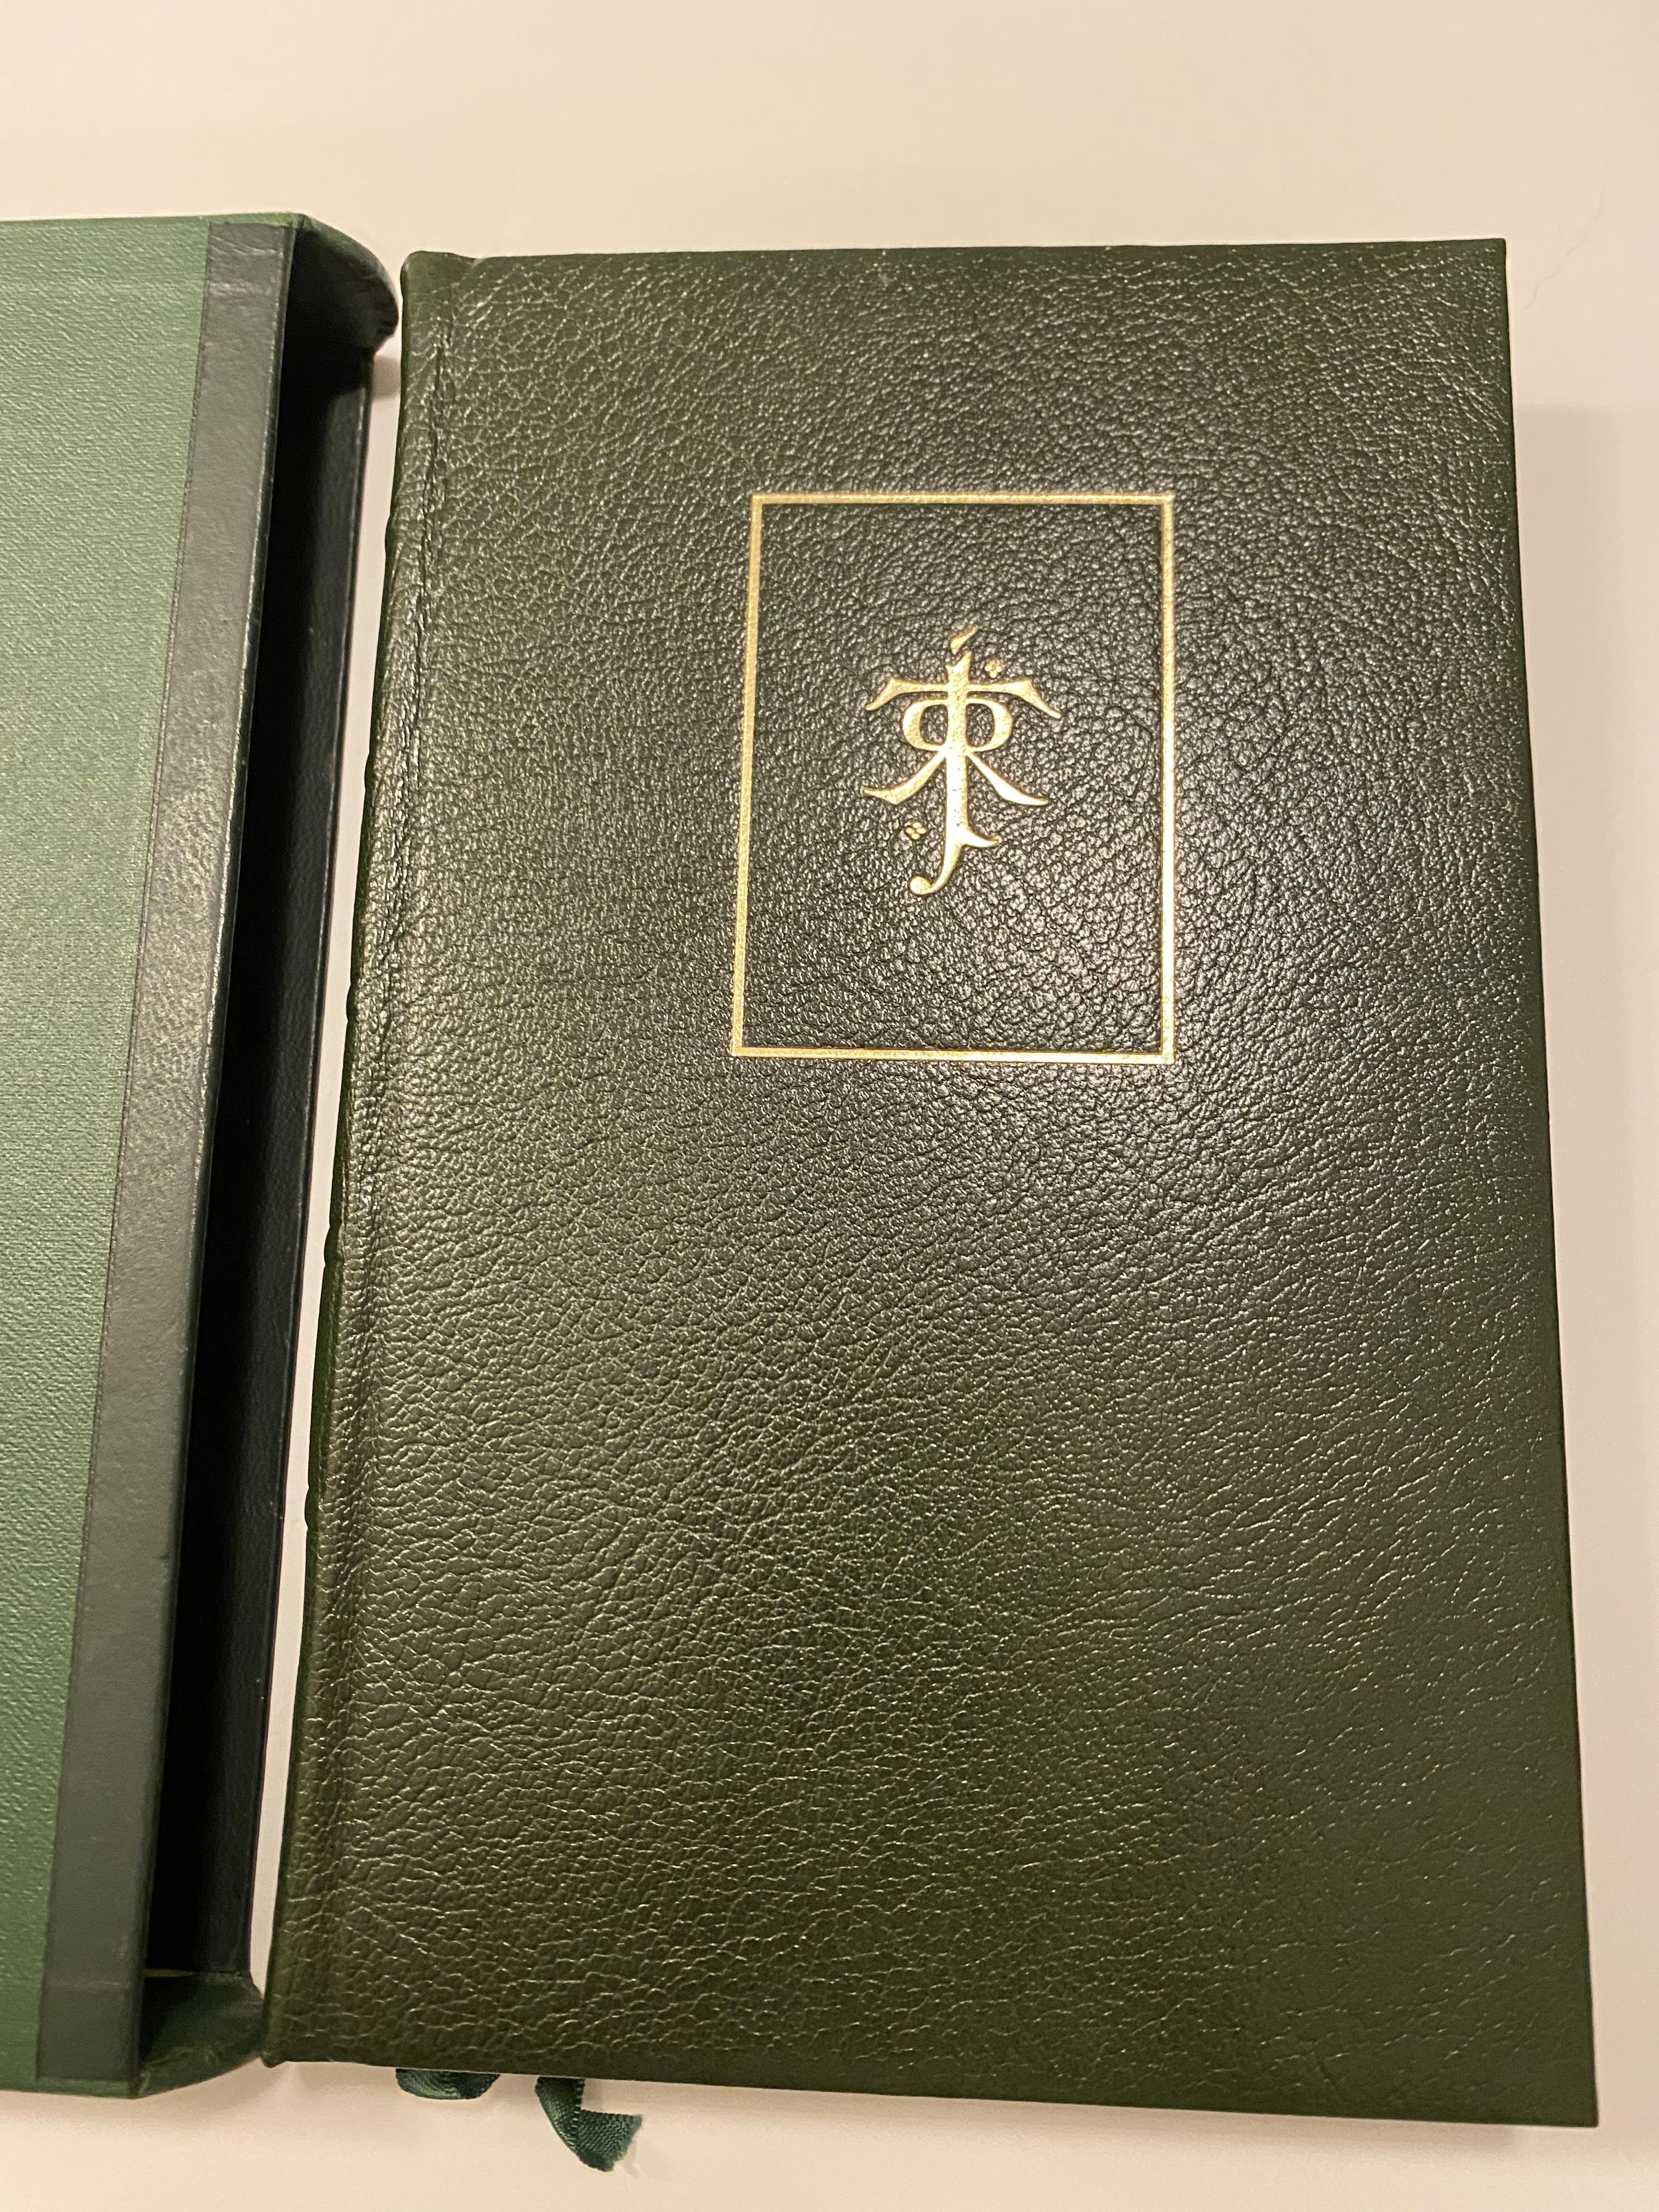 
The Hobbit, 1987 signed Super Deluxe Limited Edition #55/500 2